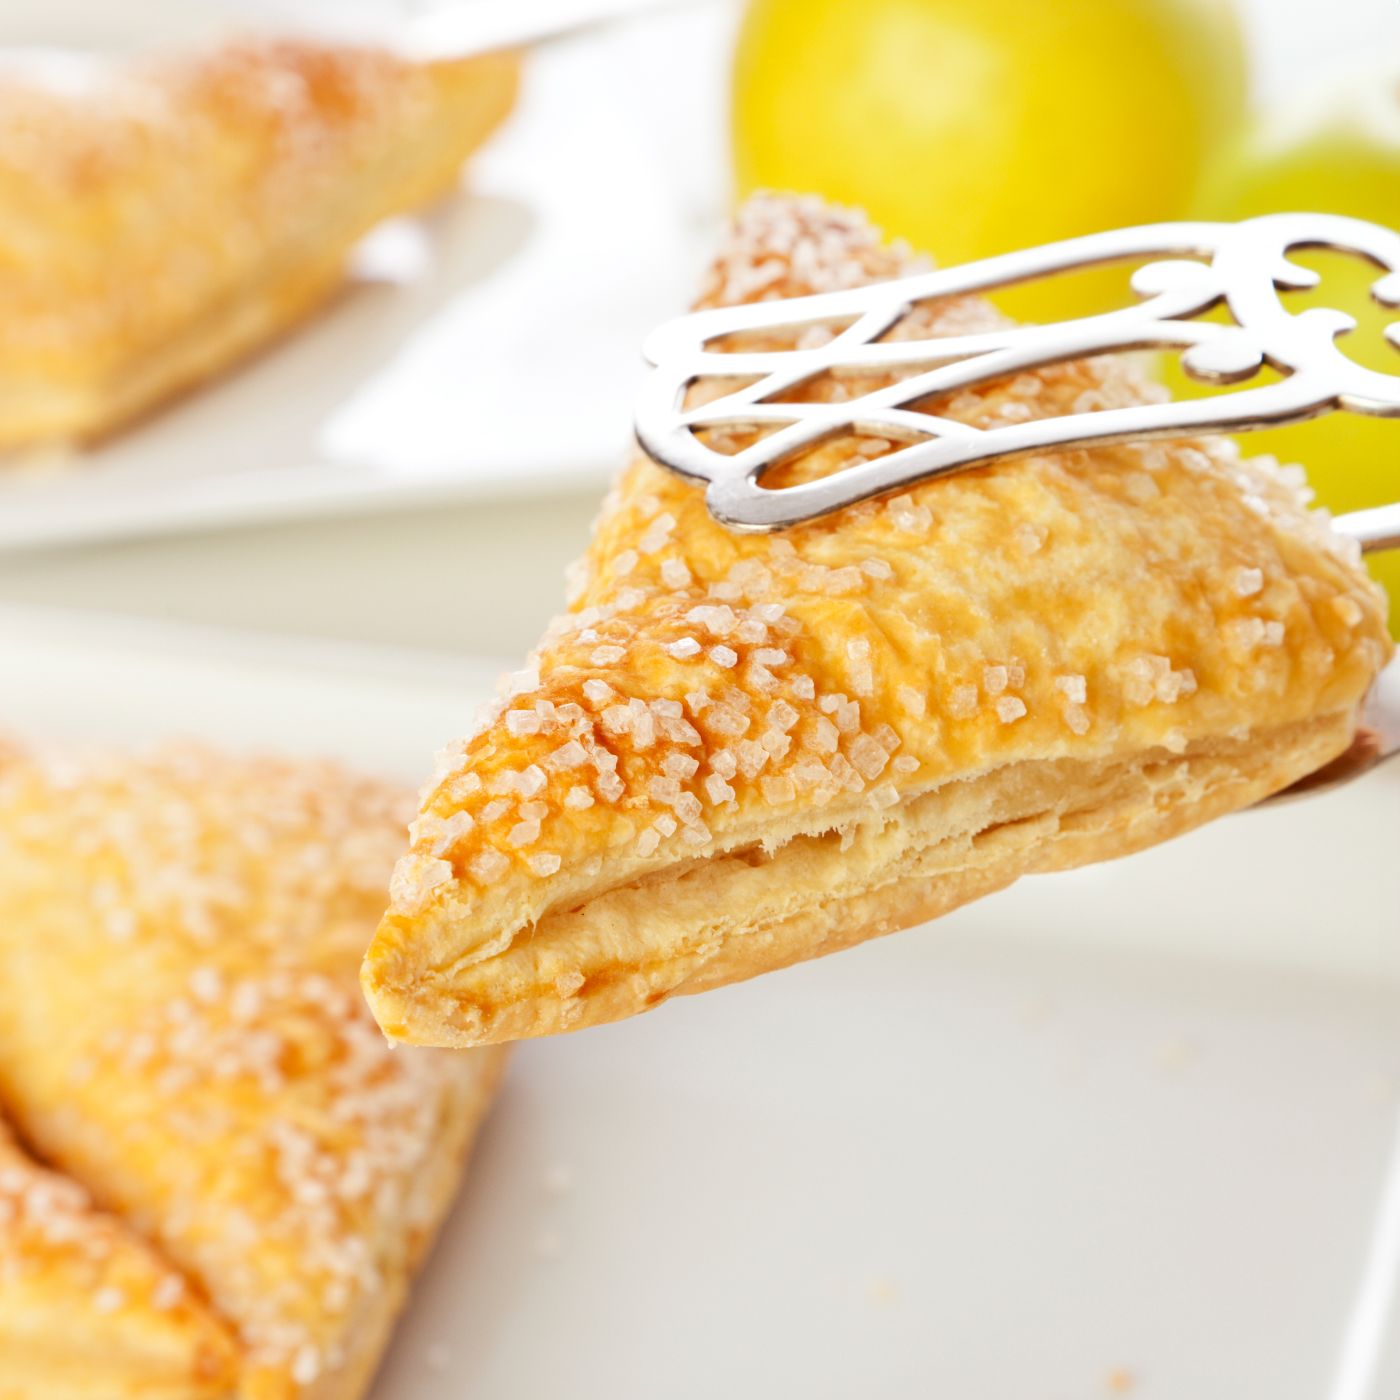 Pastry-tongs-holding-apple-turnover-178575724_3866x2578 square.jpeg